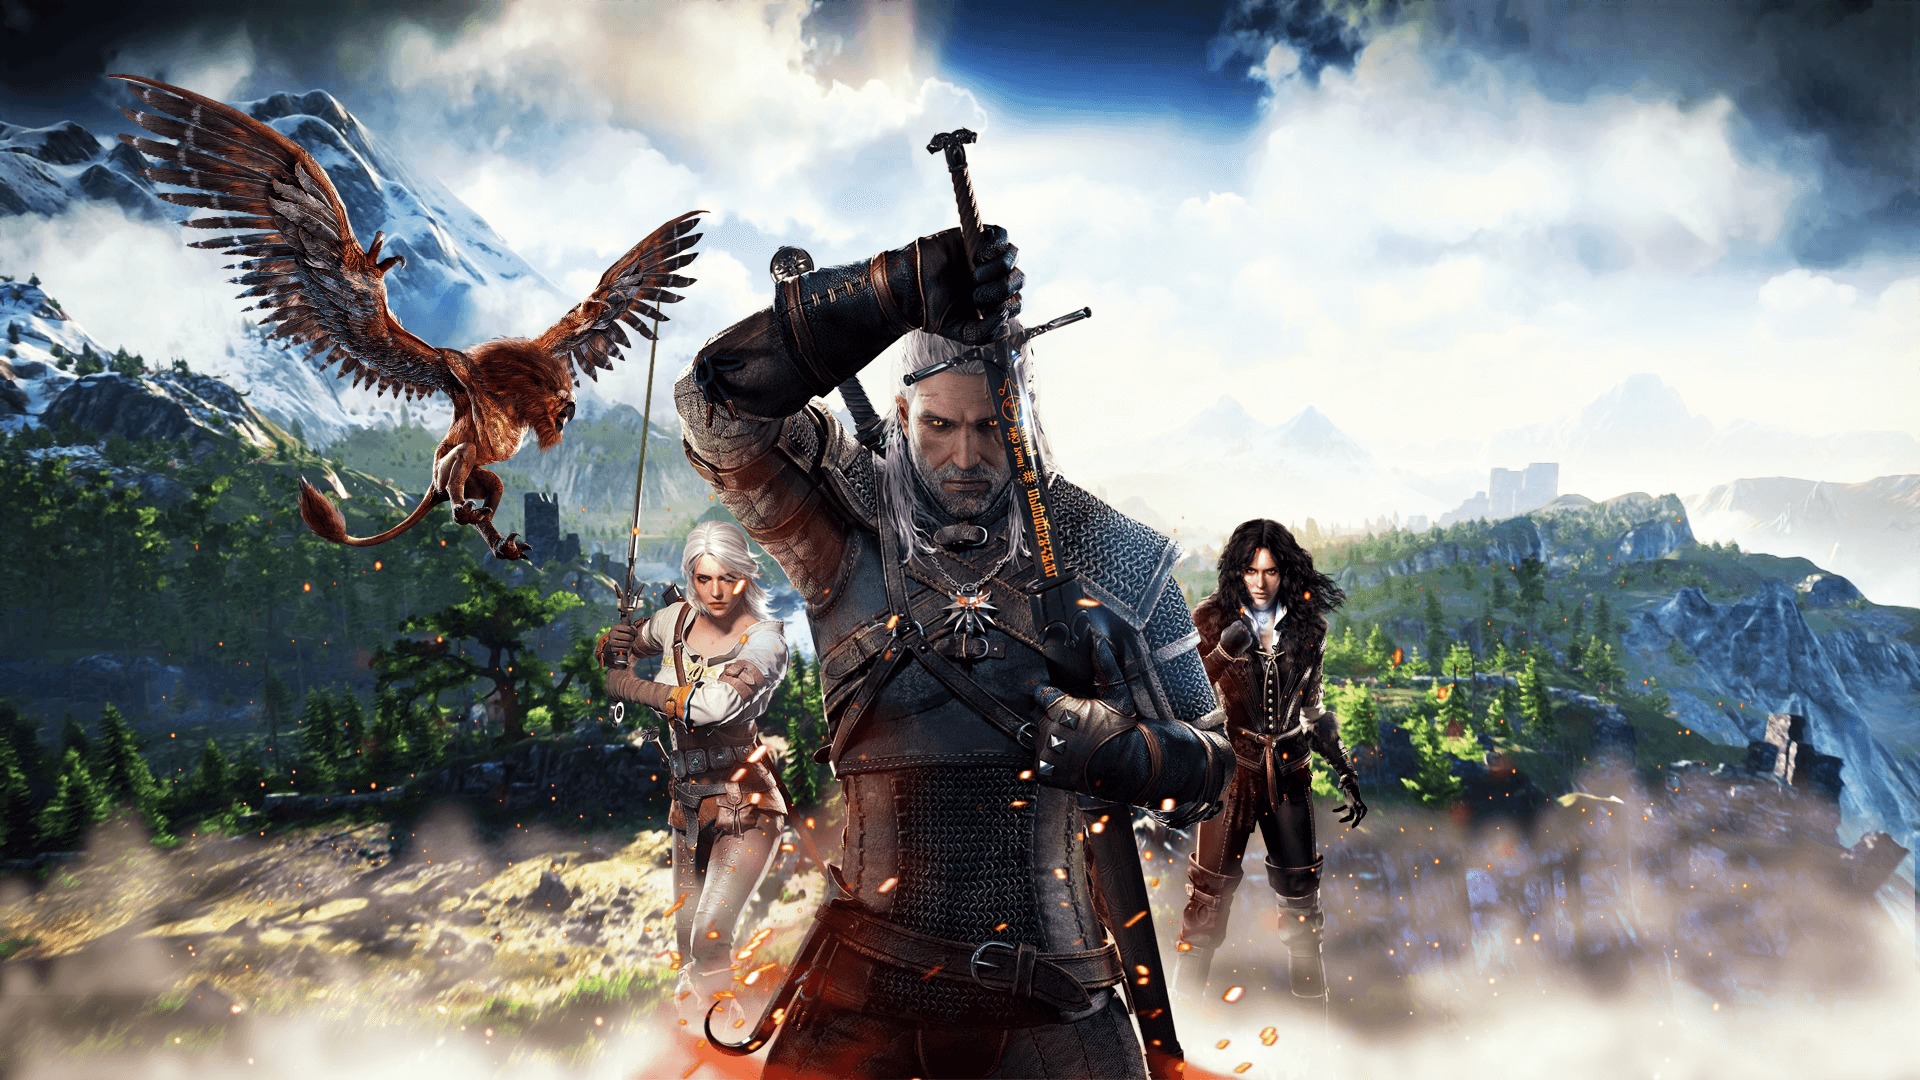 Prepare for a thrilling journey through the world of Witcher 3